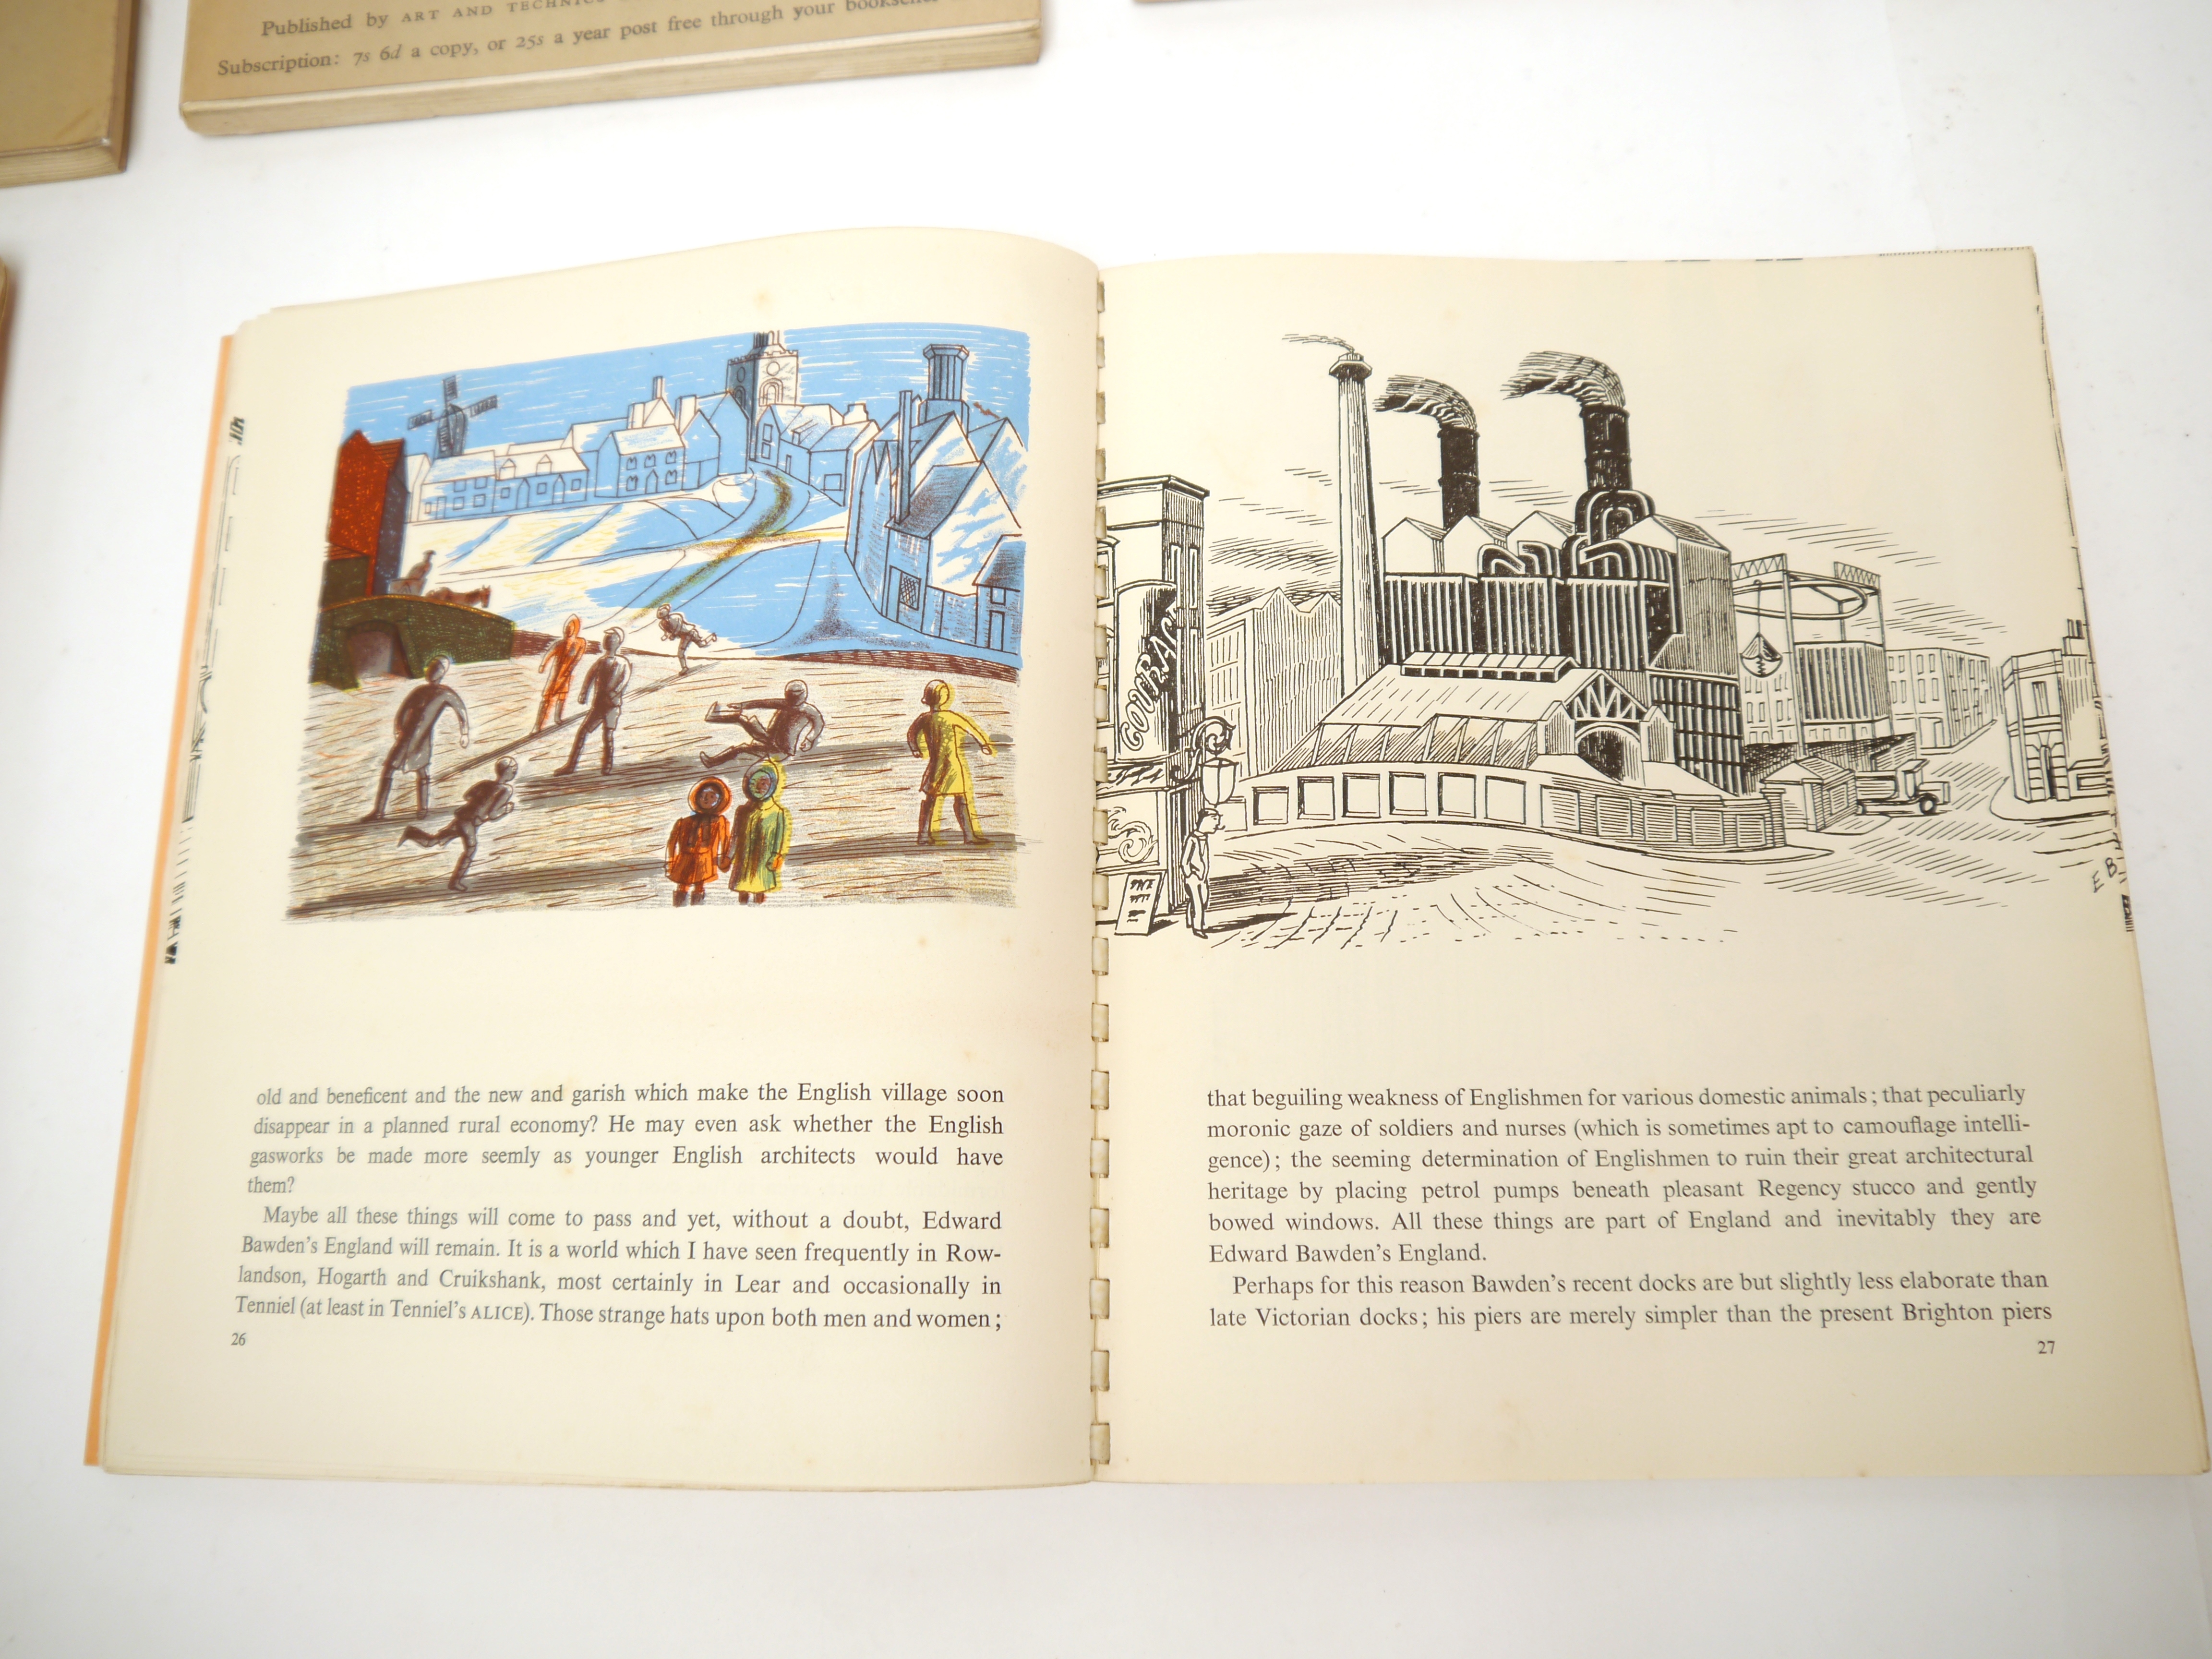 (Typography, Printing, Illustration, Early Ian Fleming in Print.), 'Alphabet & Image', Shenval - Image 12 of 31